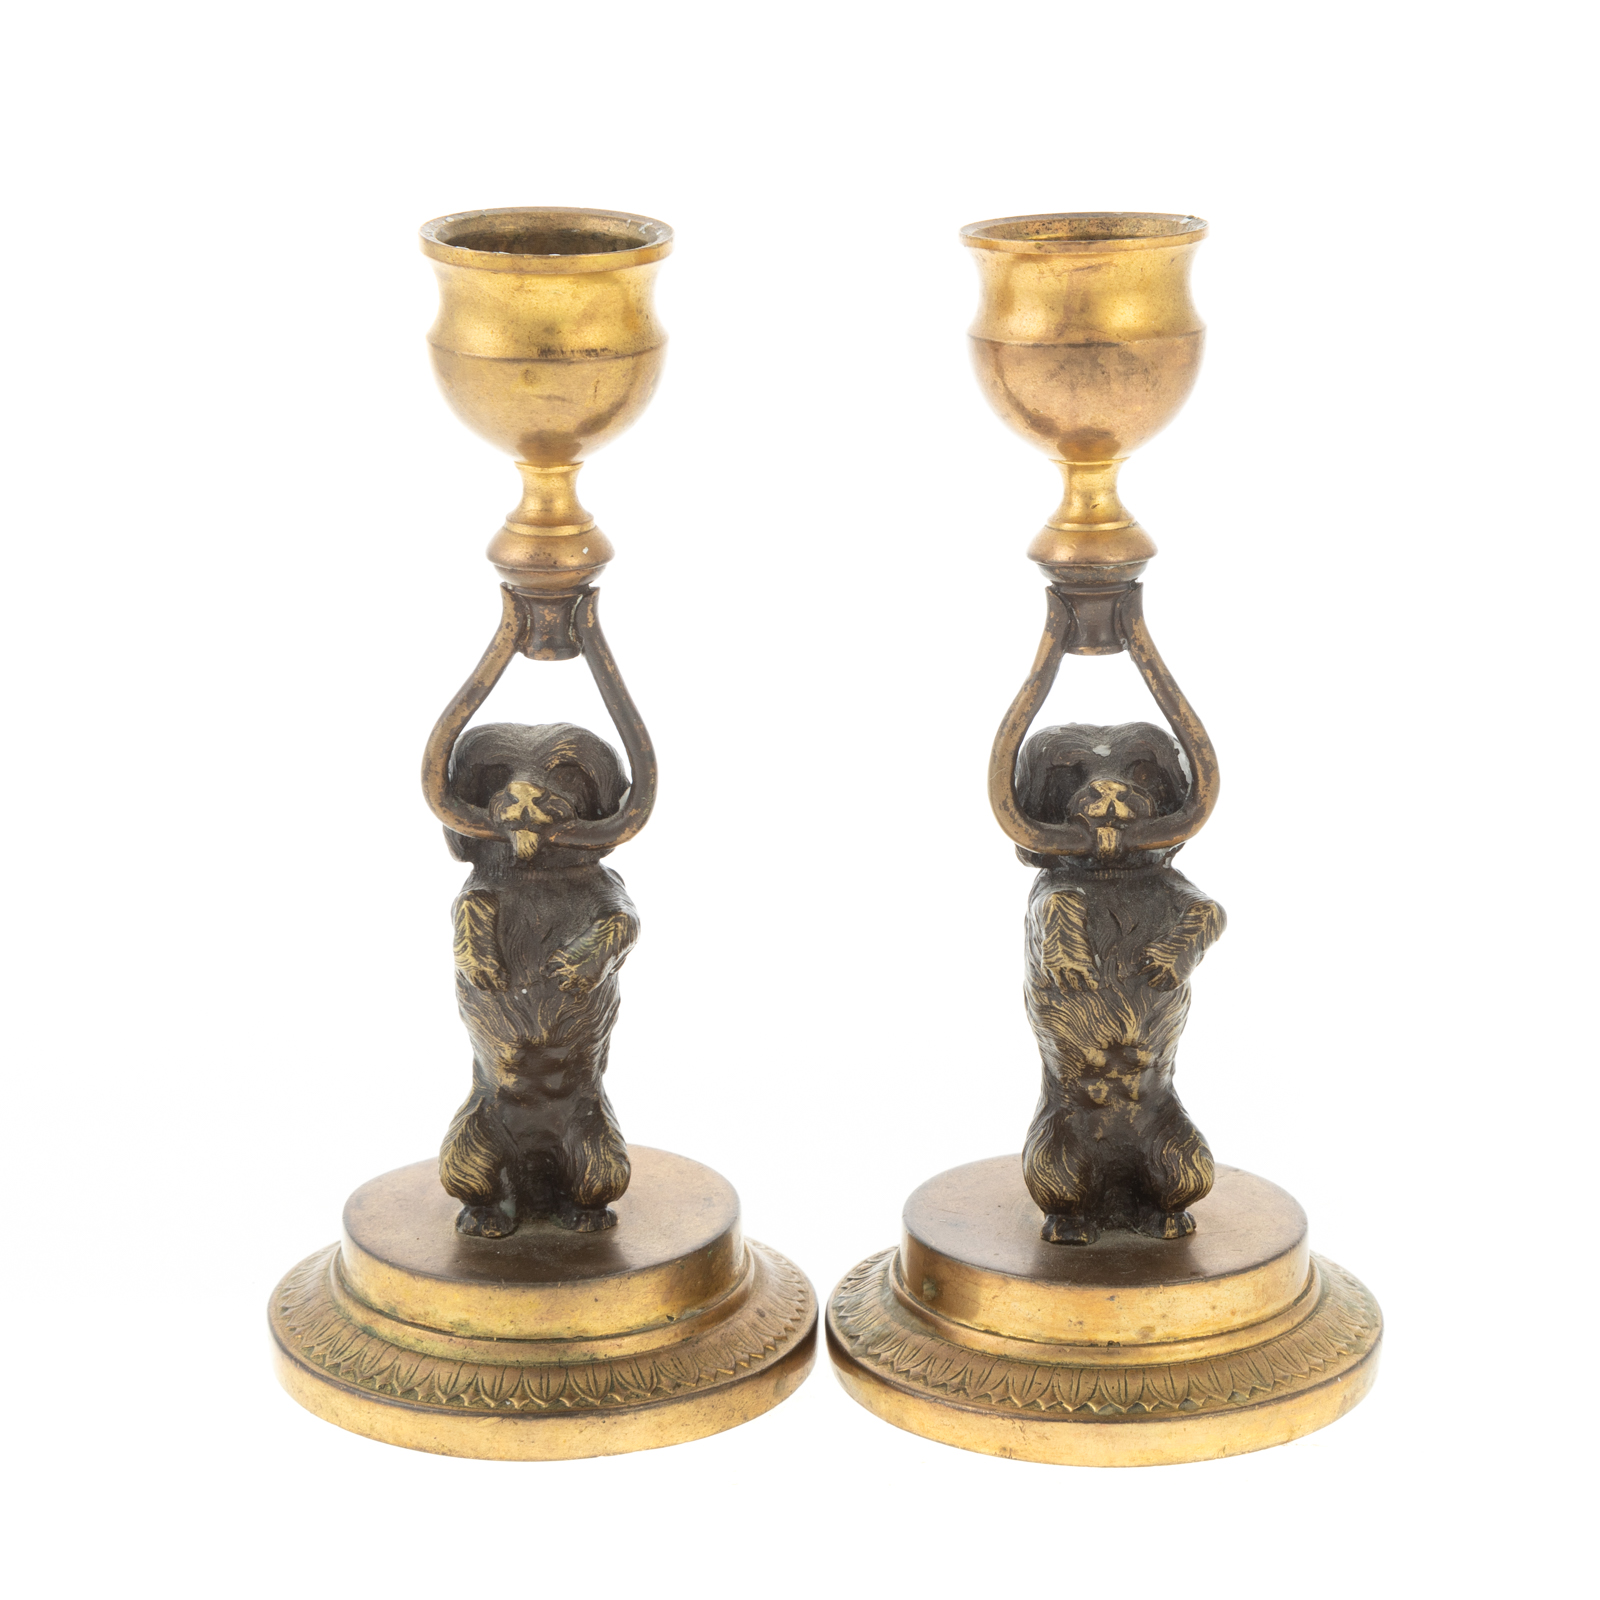 A PAIR OF CONTINENTAL BRONZE FIGURAL